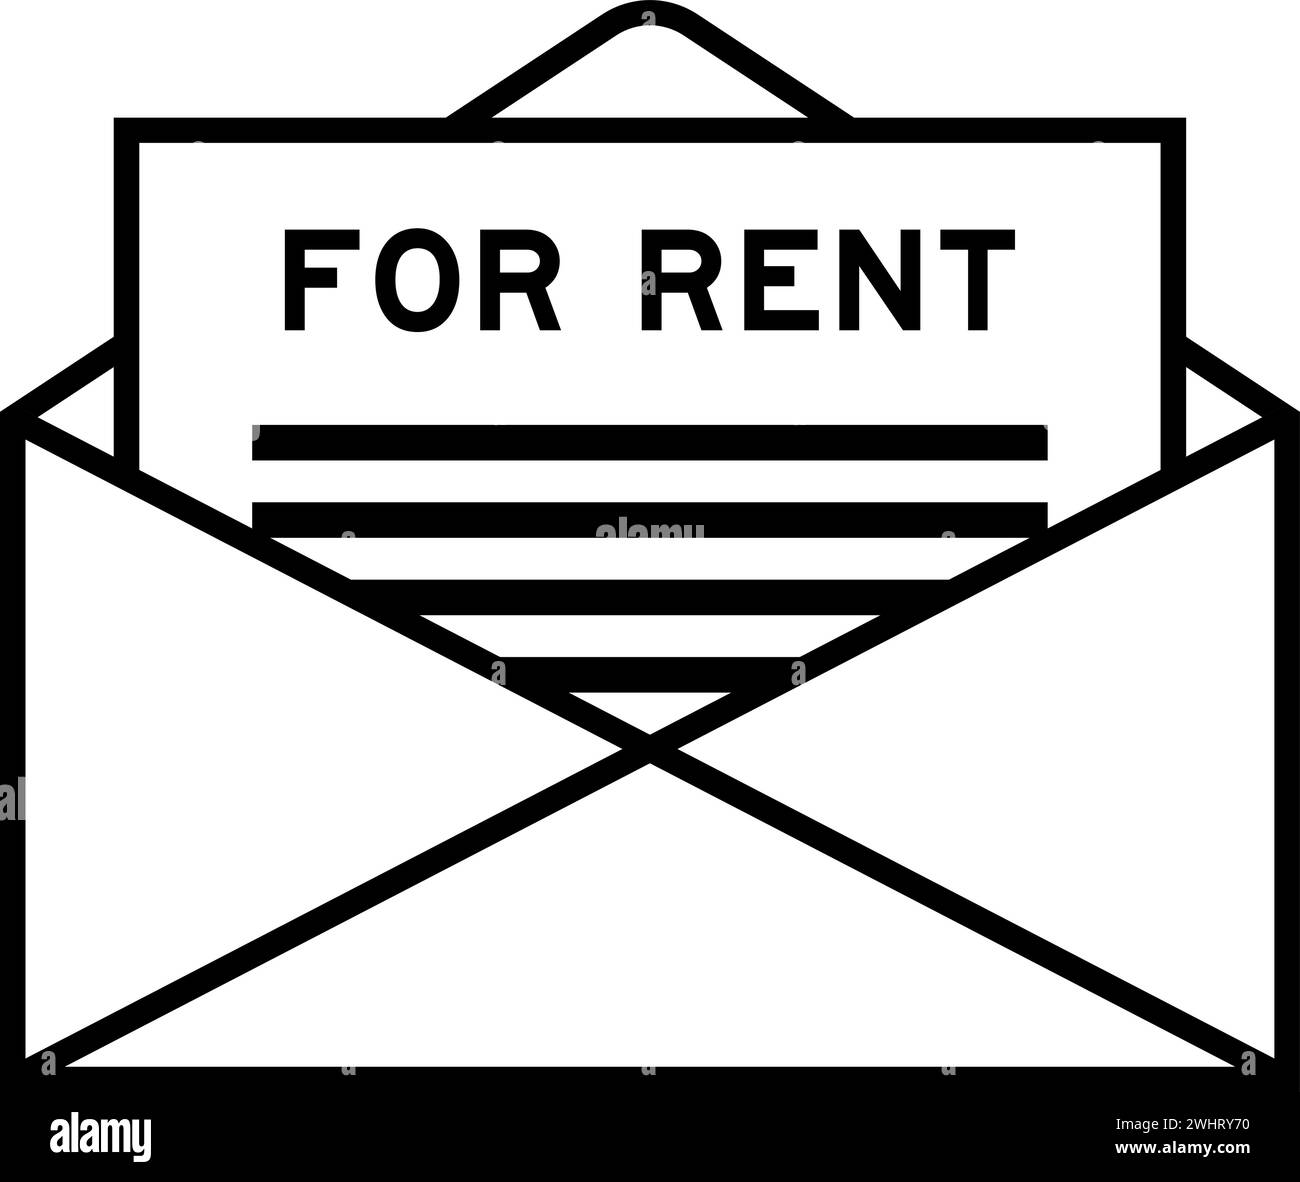 Envelope and letter sign with word for rent as the headline Stock Vector